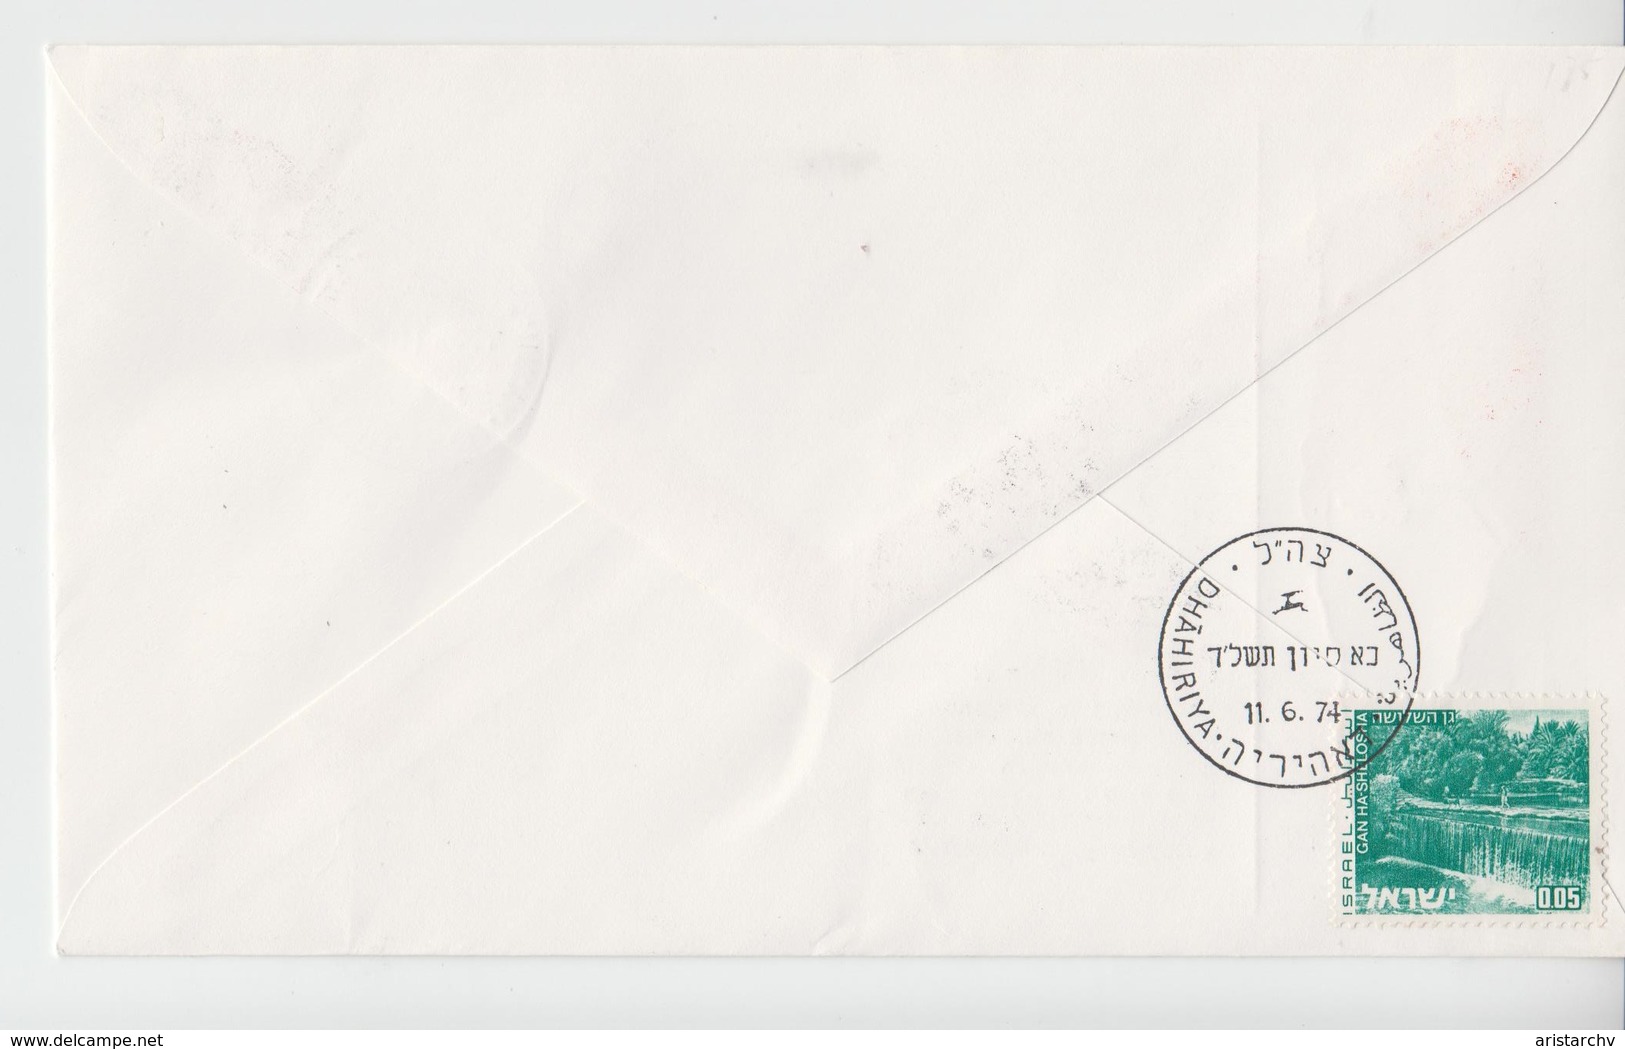 ISRAEL 1974 DHAHIRIYA OPENING DAY POST OFFICE JORDANIAN TERRITORY UNDER MILITARY ADMINISTRATION TZAHAL IDF COVER - Strafport